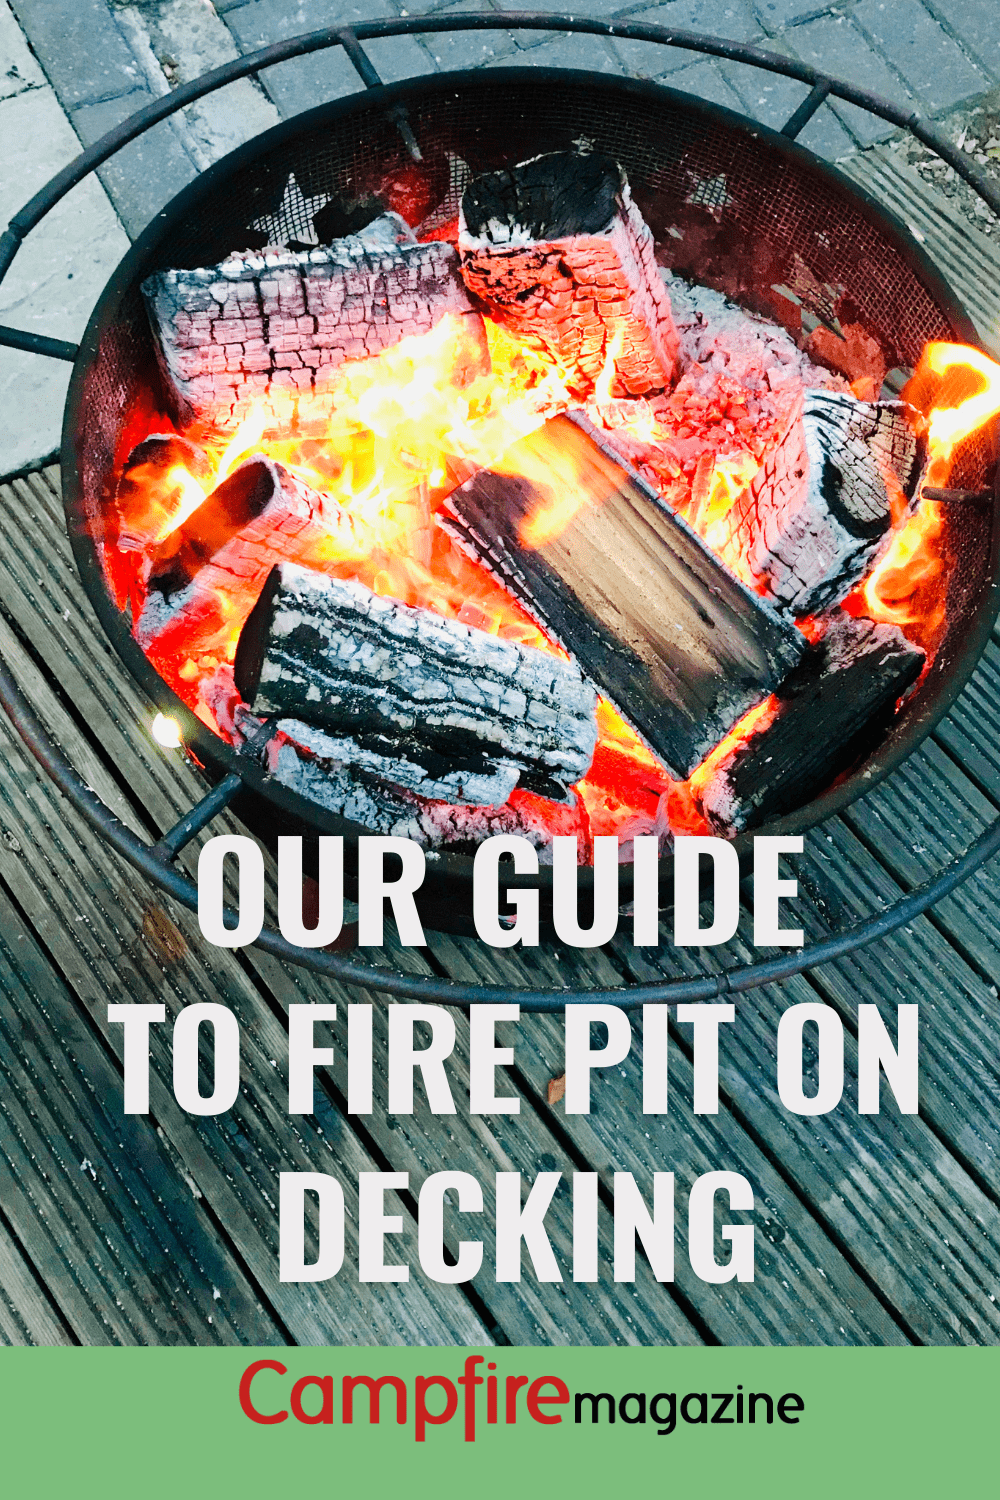 Our Guide To Have A Fire Pit On Decking, Is It Safe To Put A Fire Pit On Decking